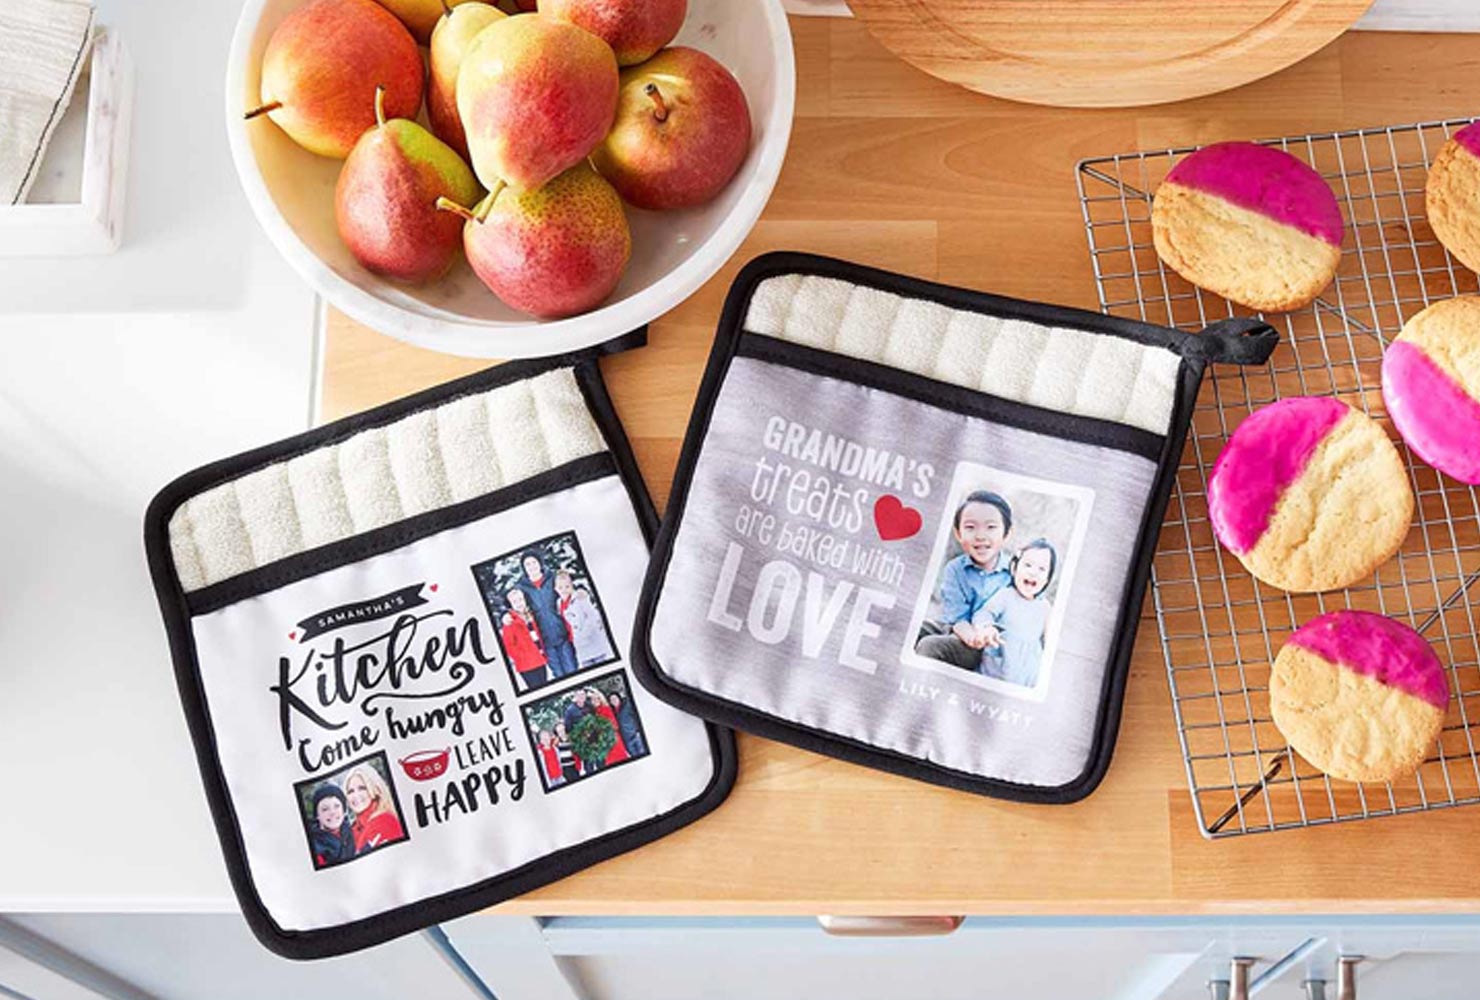 christmas gift ideas for friends personalized potholder.